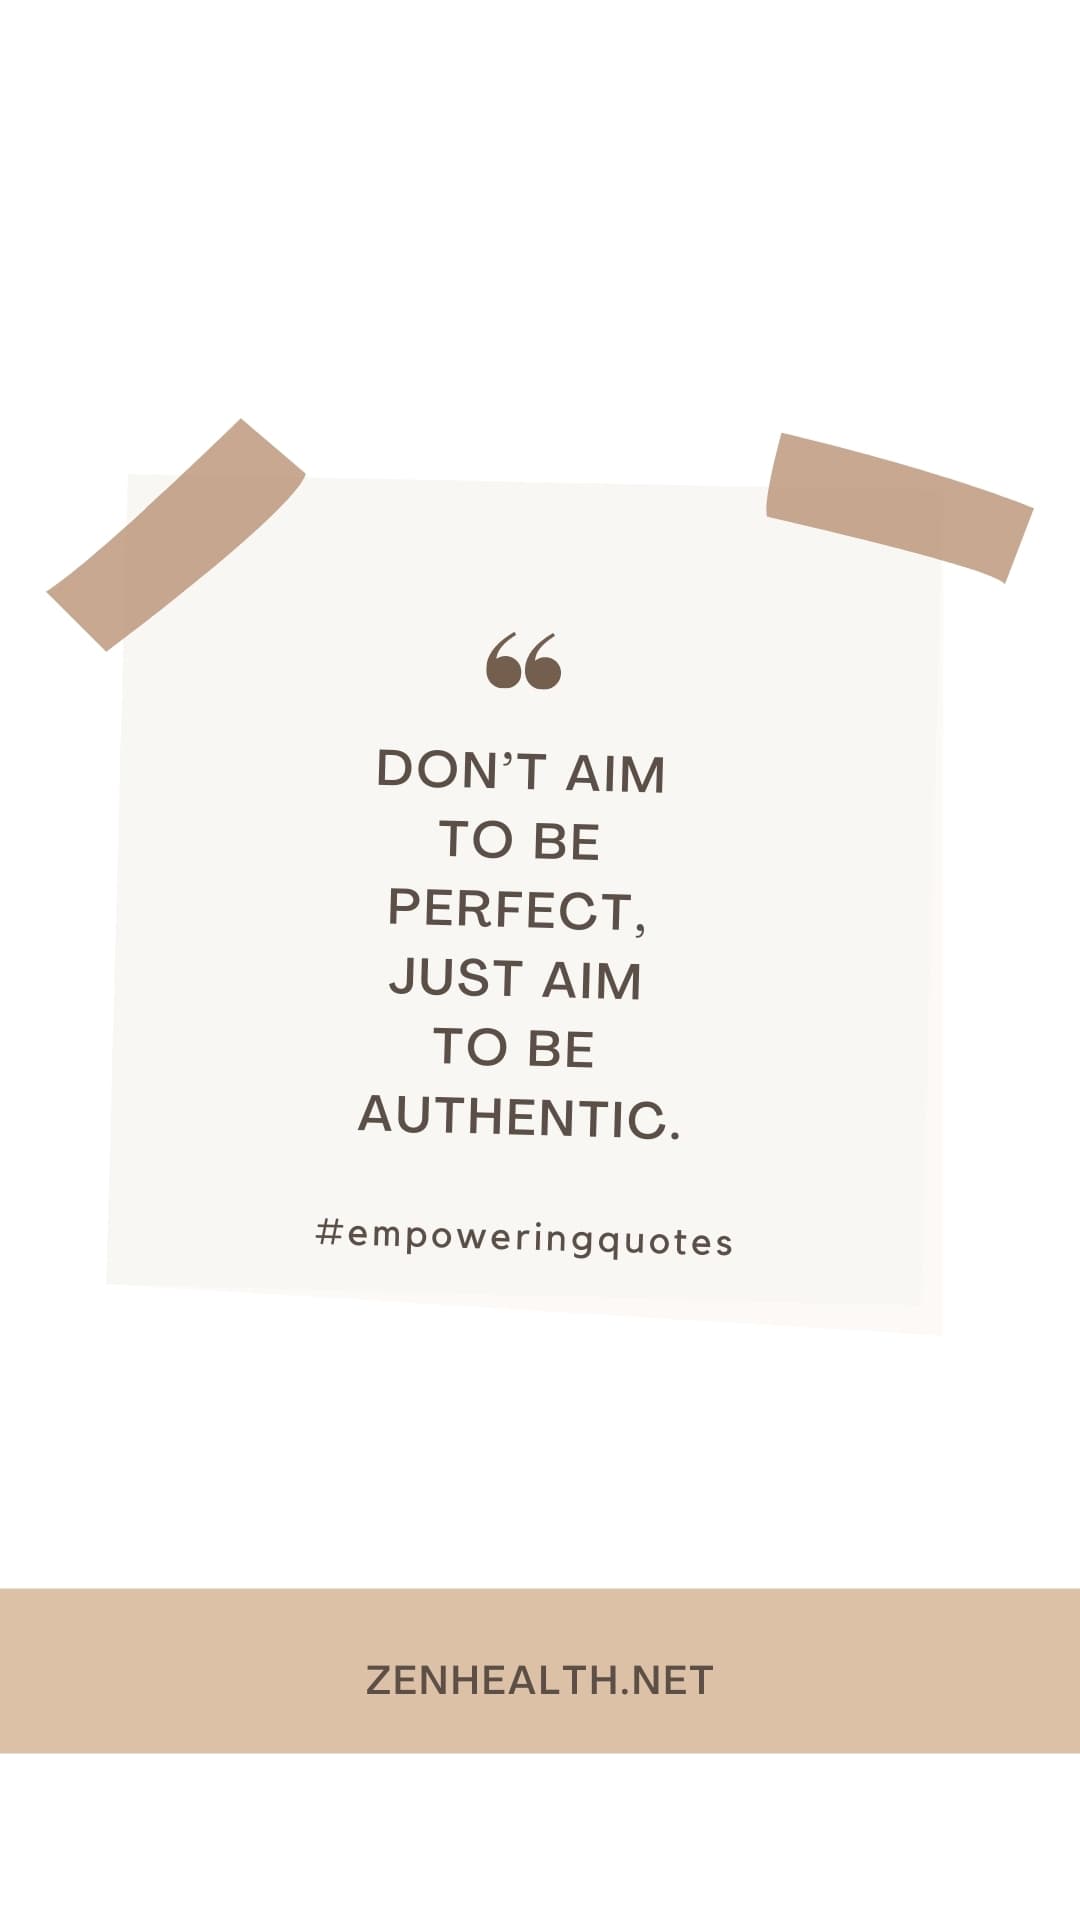 empowering quotes be authentic